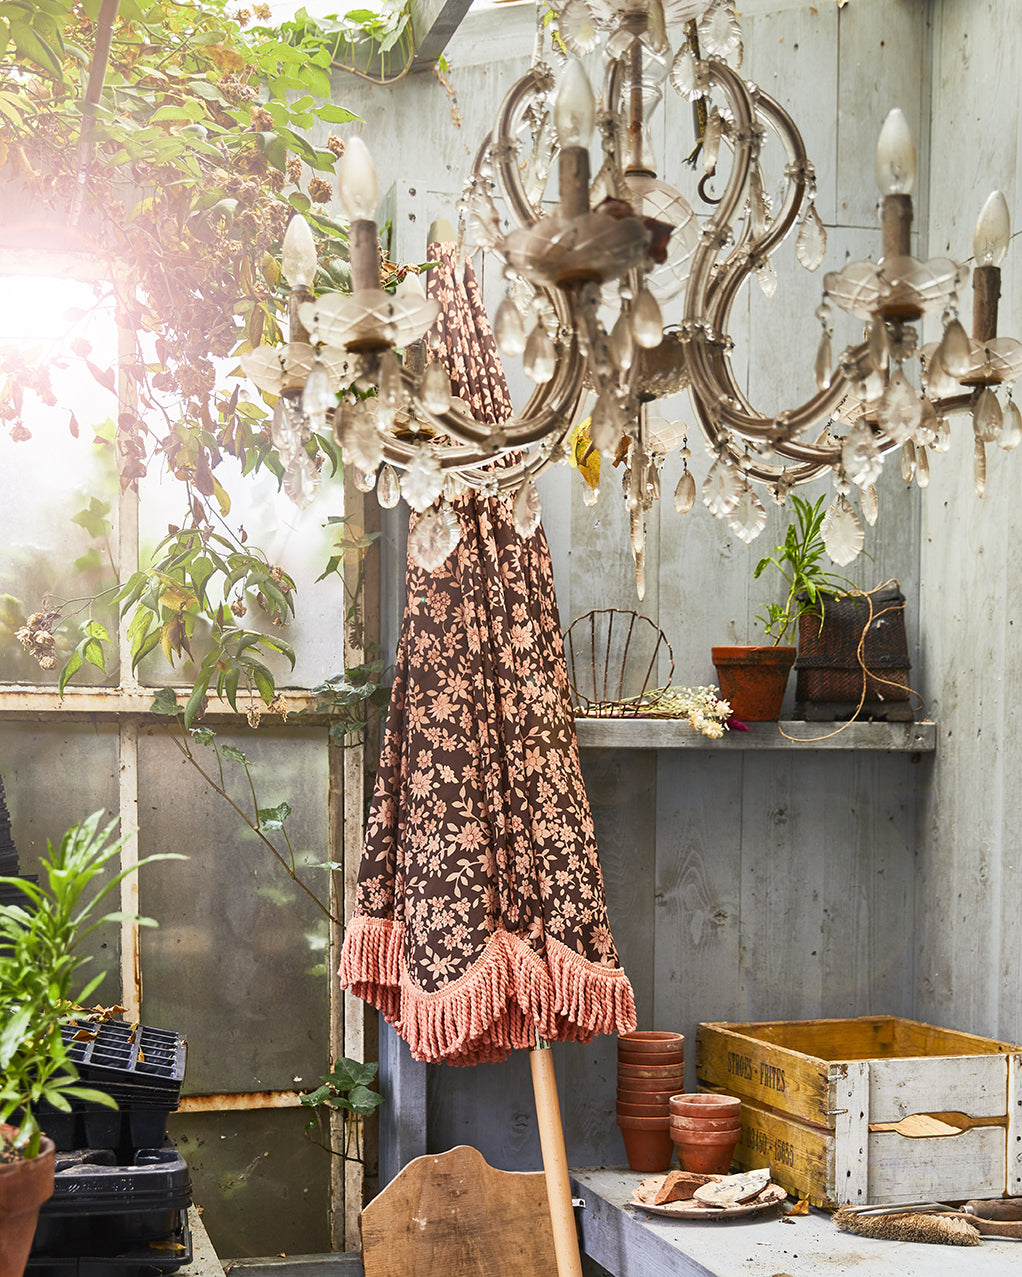 retro style beach umbrella with brown and orange floral fabric and orange fringes in a shed leaning aganst a wall with a vintage chandelier hanging in front of it